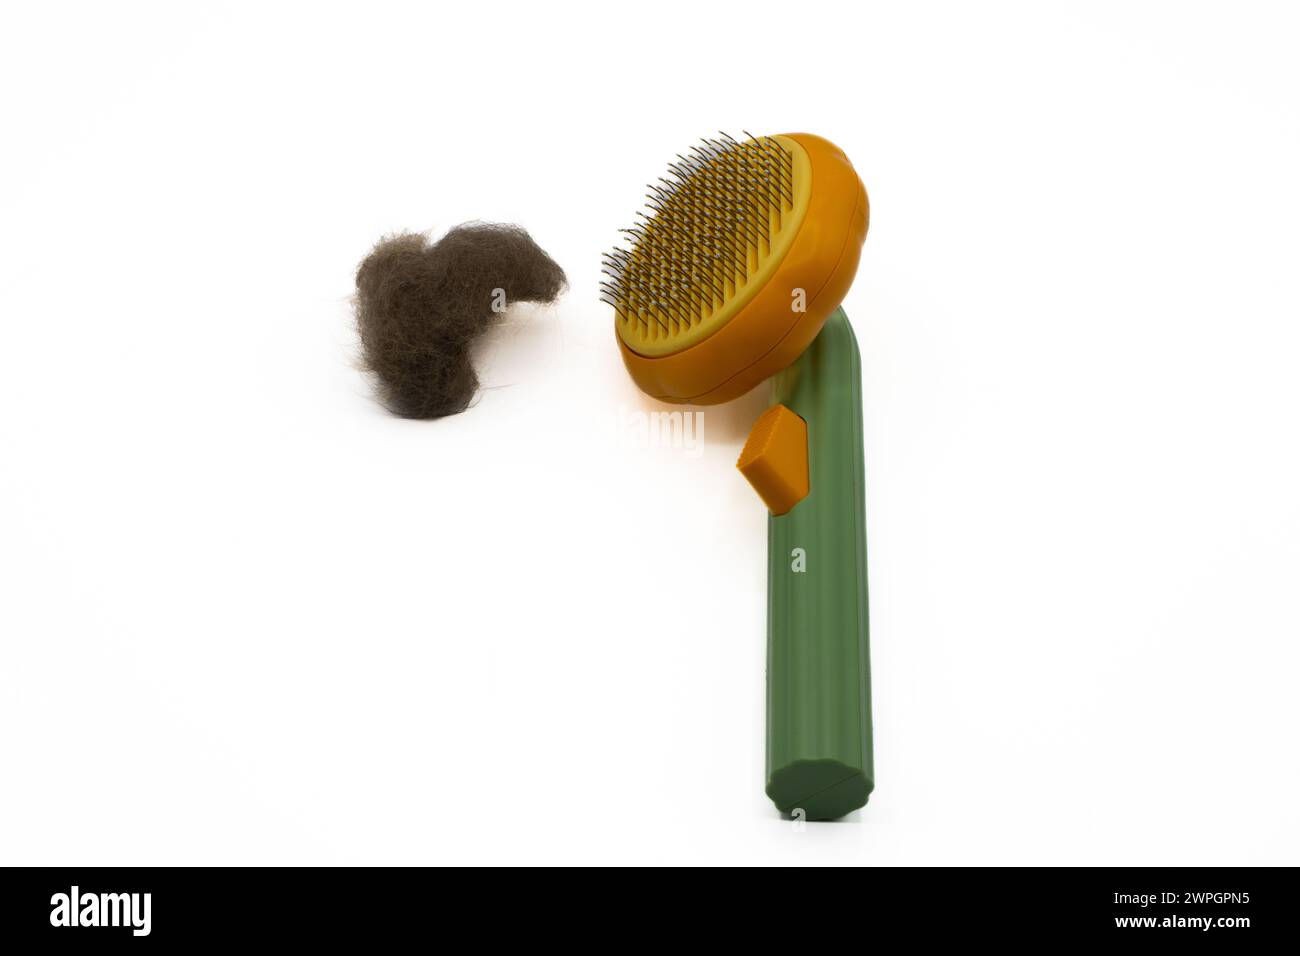 Cat hair brush with tuft of cat fur next to it Stock Photo